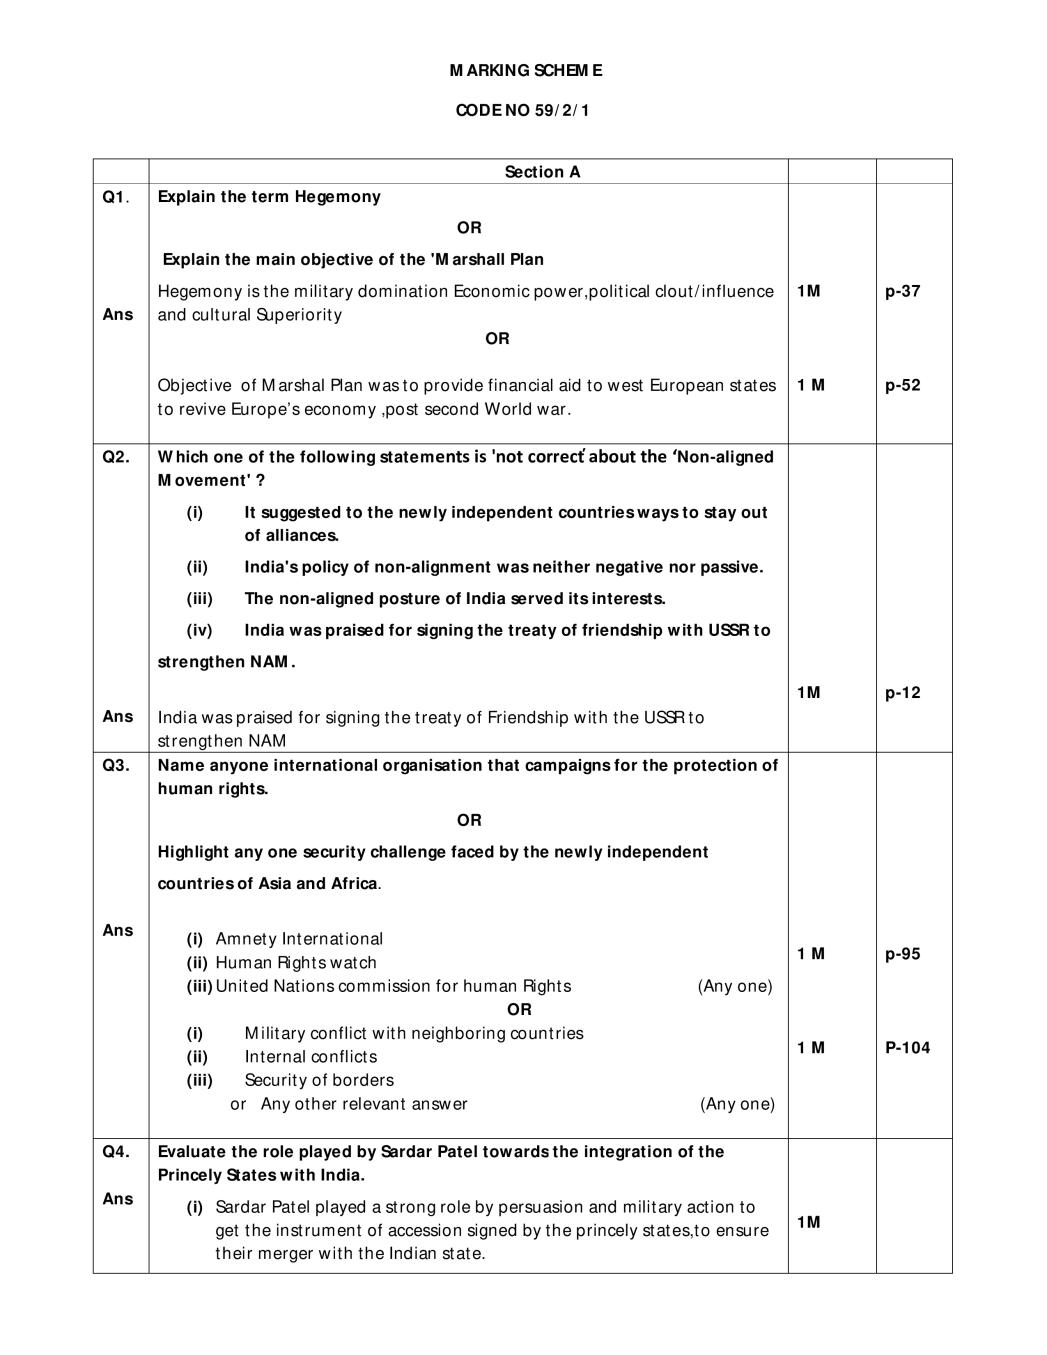 CBSE Class 12 Political Science Question Paper 2019 Set 2 Solutions - Page 1